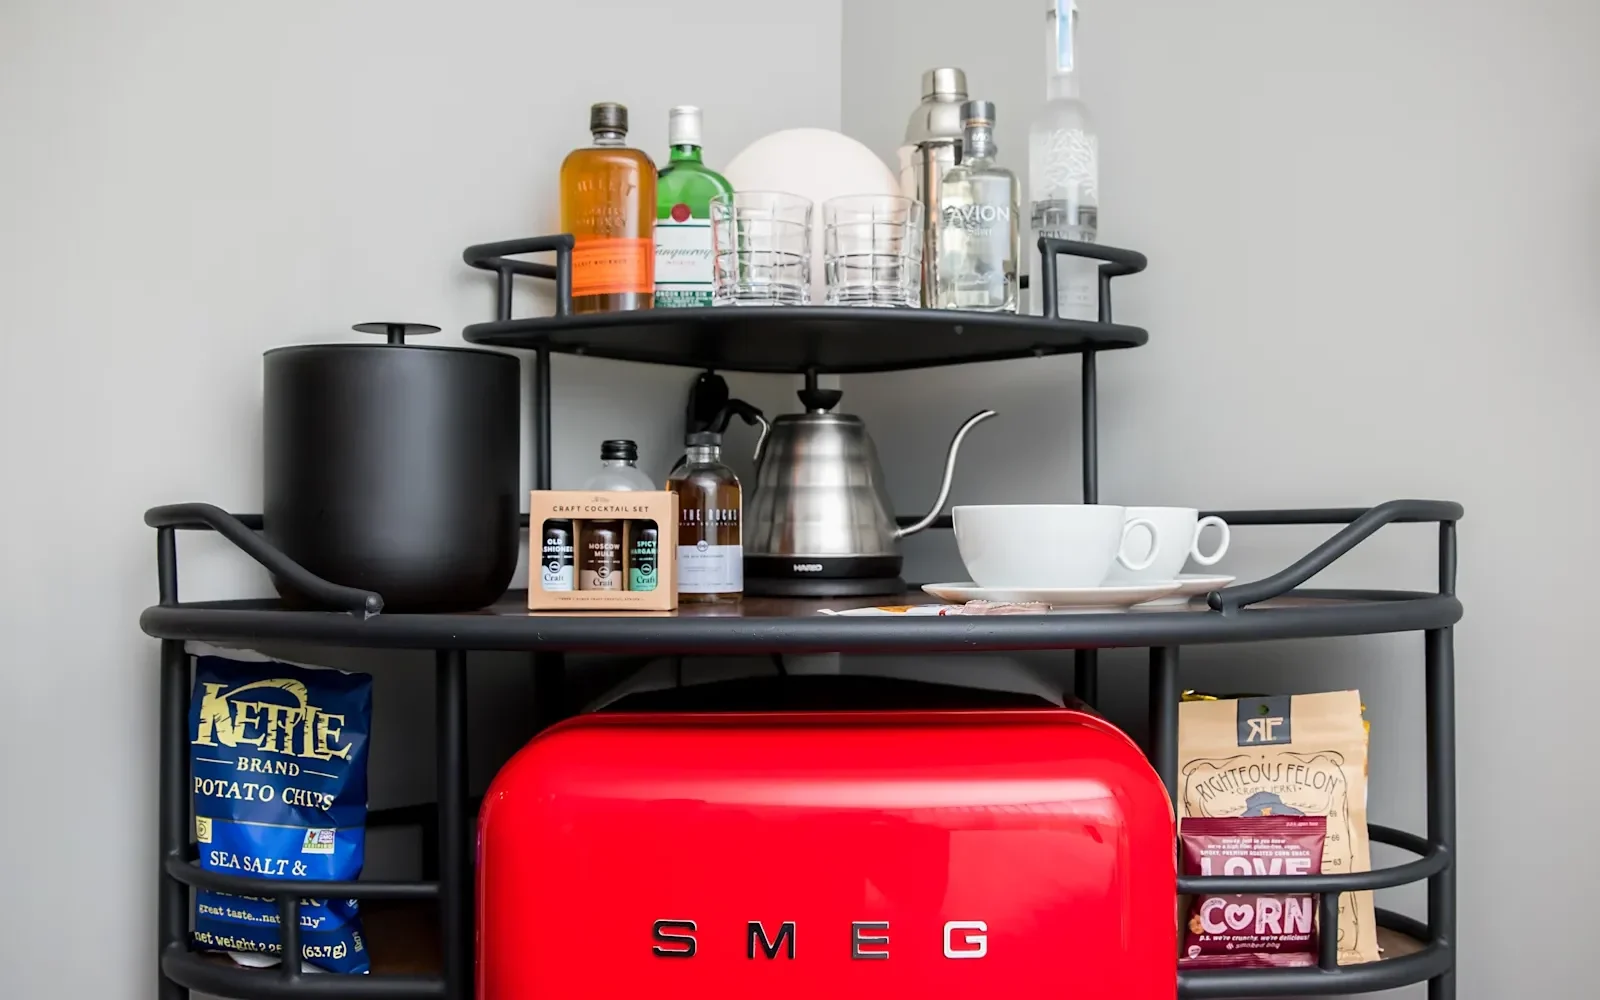 Red Smeg fridge underneath a small table that has food and drinks atop it